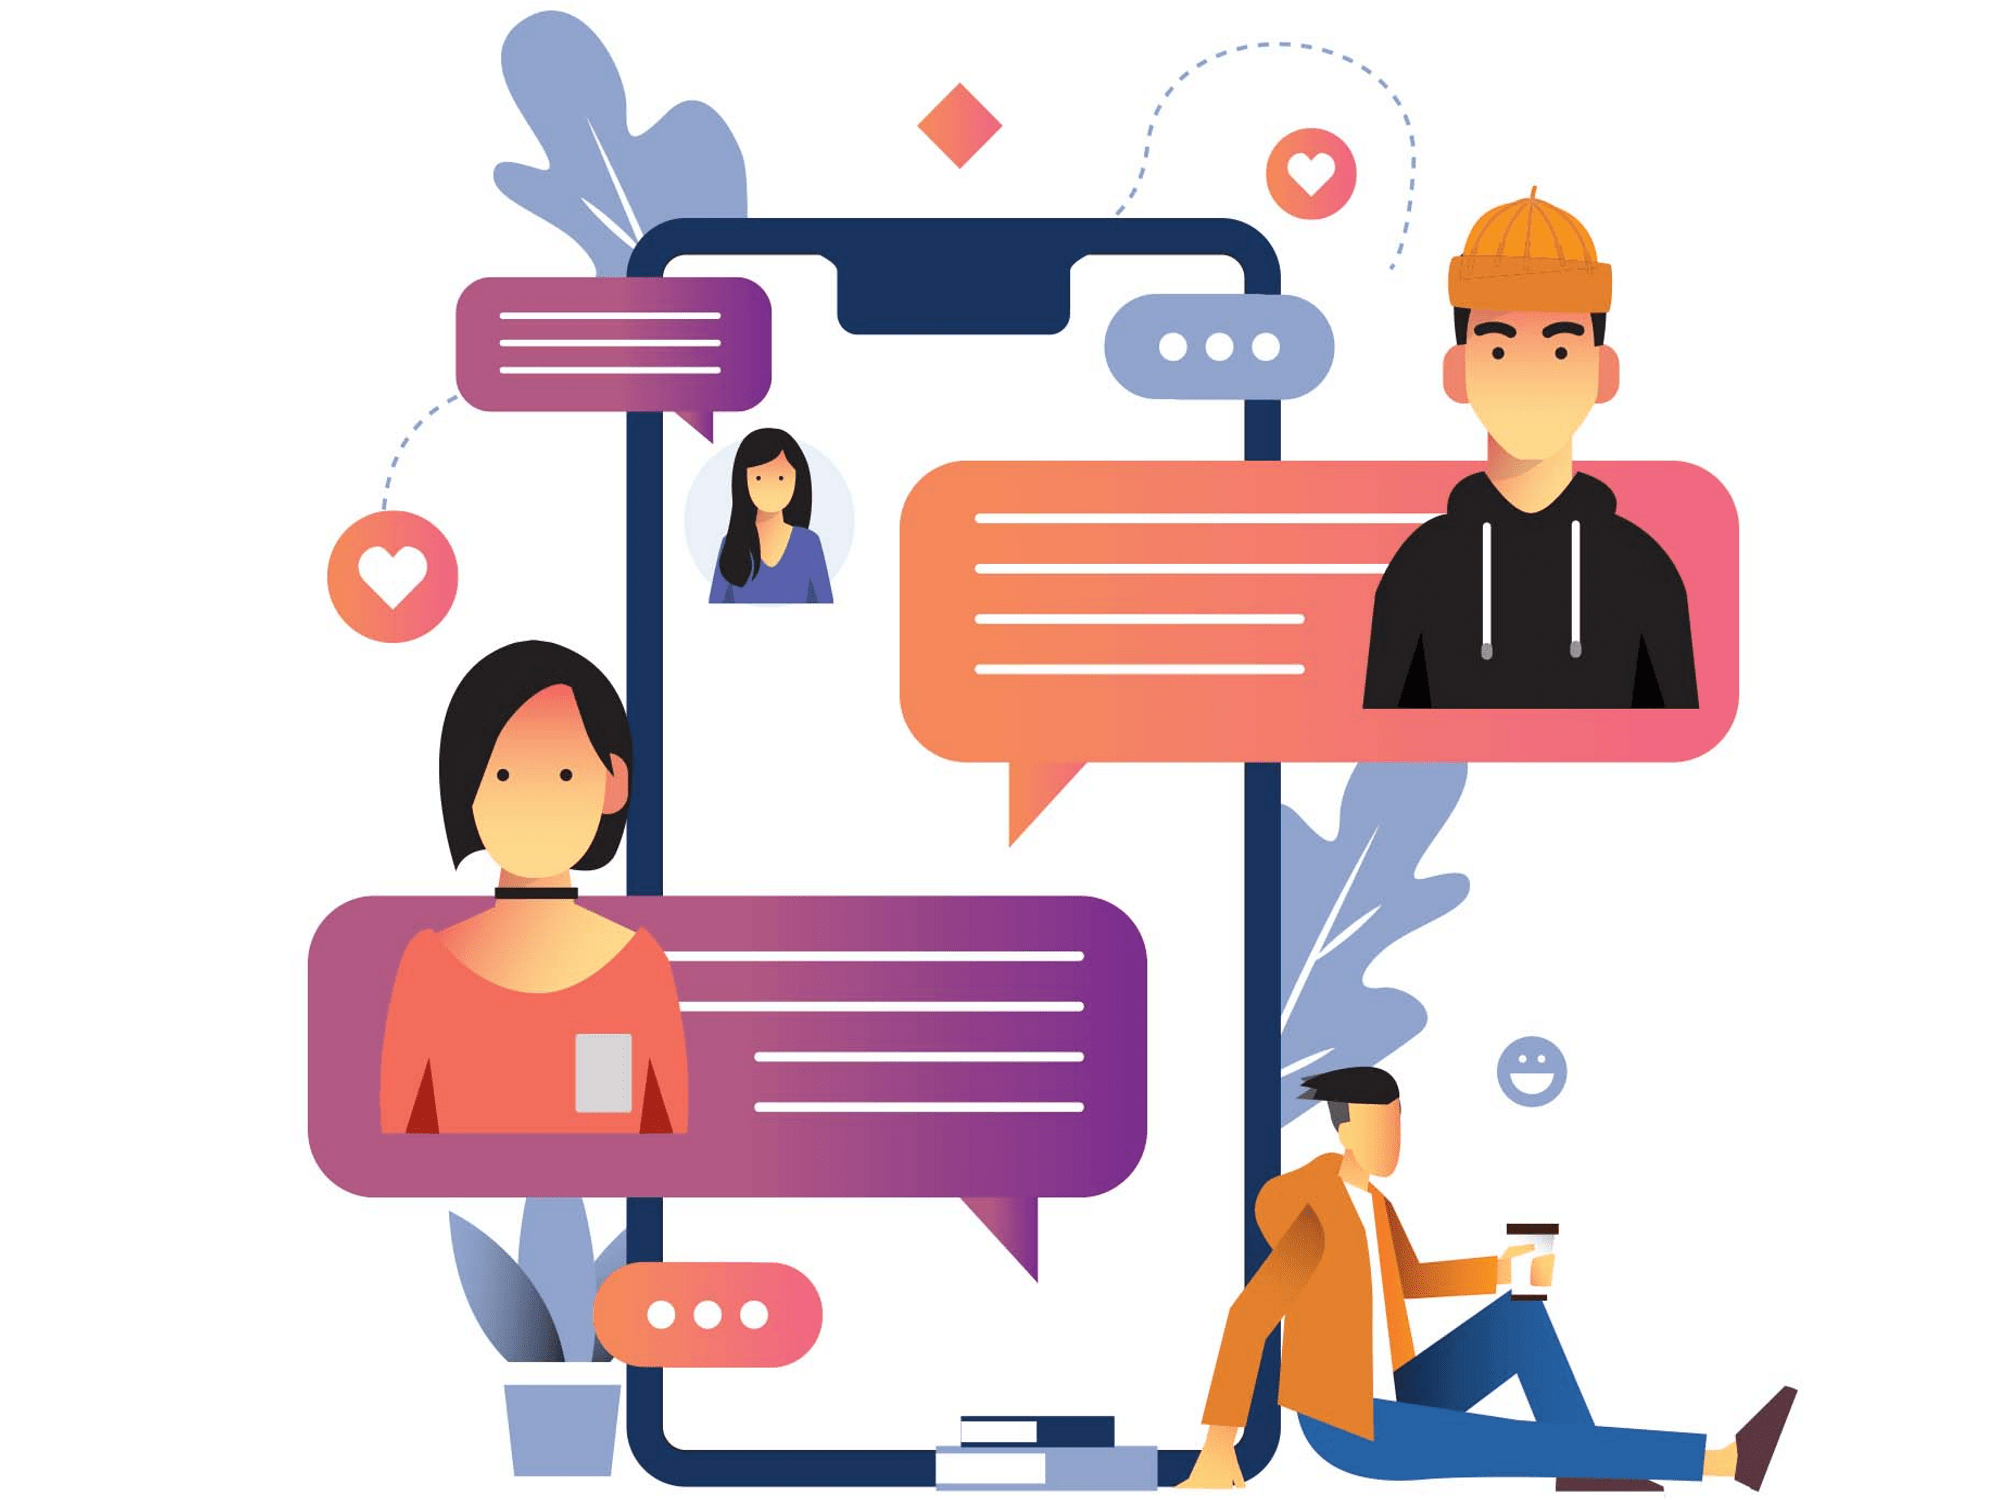 Stylized drawing of a group chat where people are talking and building relationship